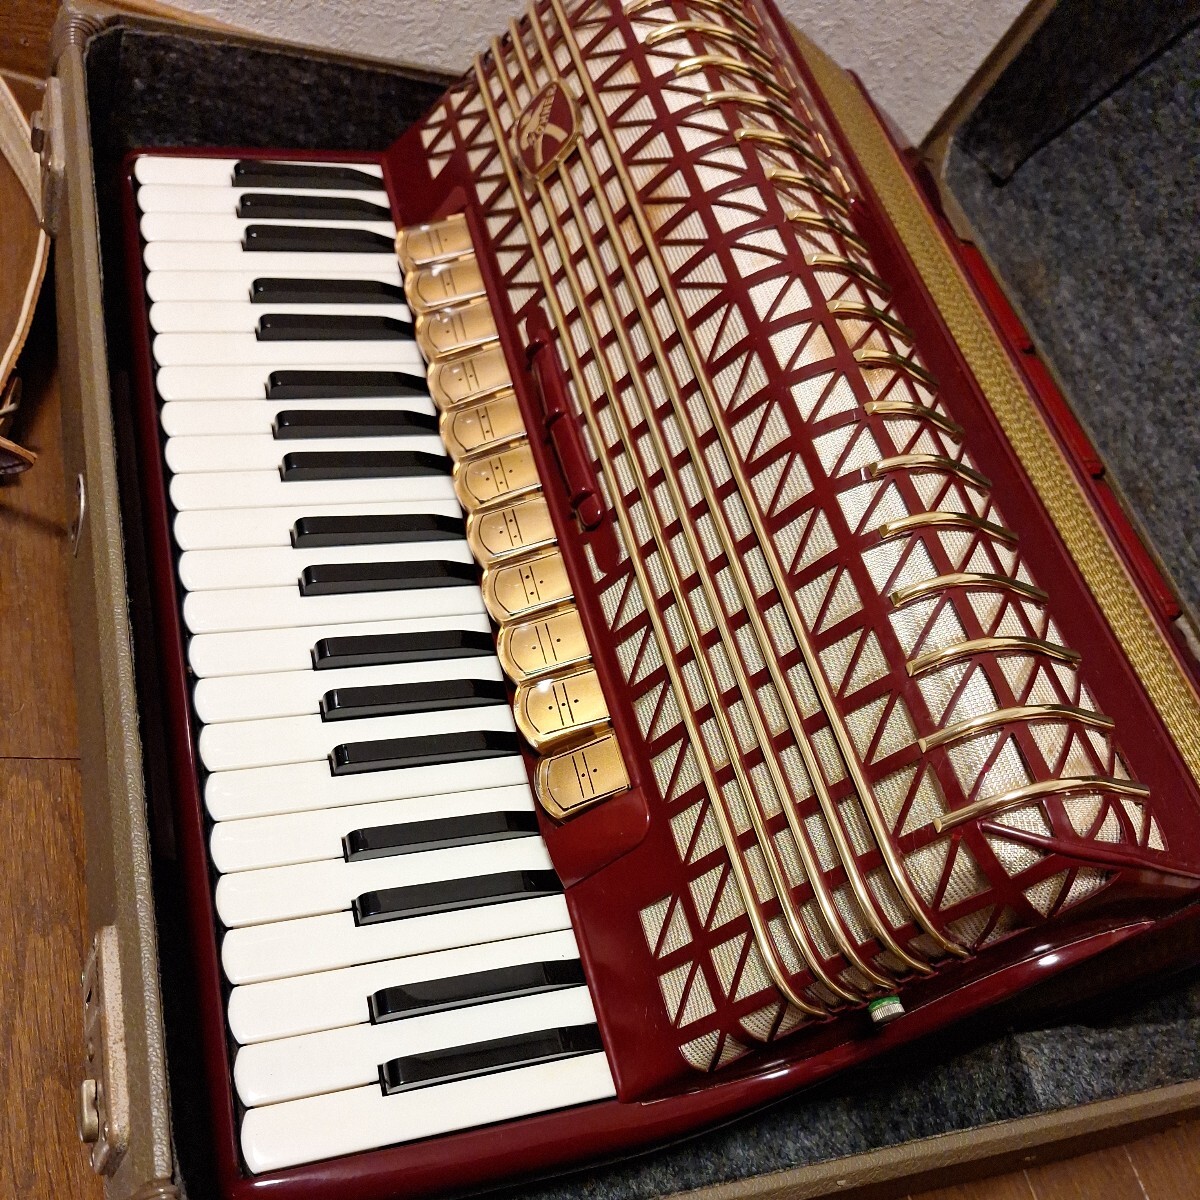  rare rare horn na-HOHNER ATLANTIC IV Deluxe 41 key 120 base keyboard type accordion original hard case key attaching Germany made wine red 